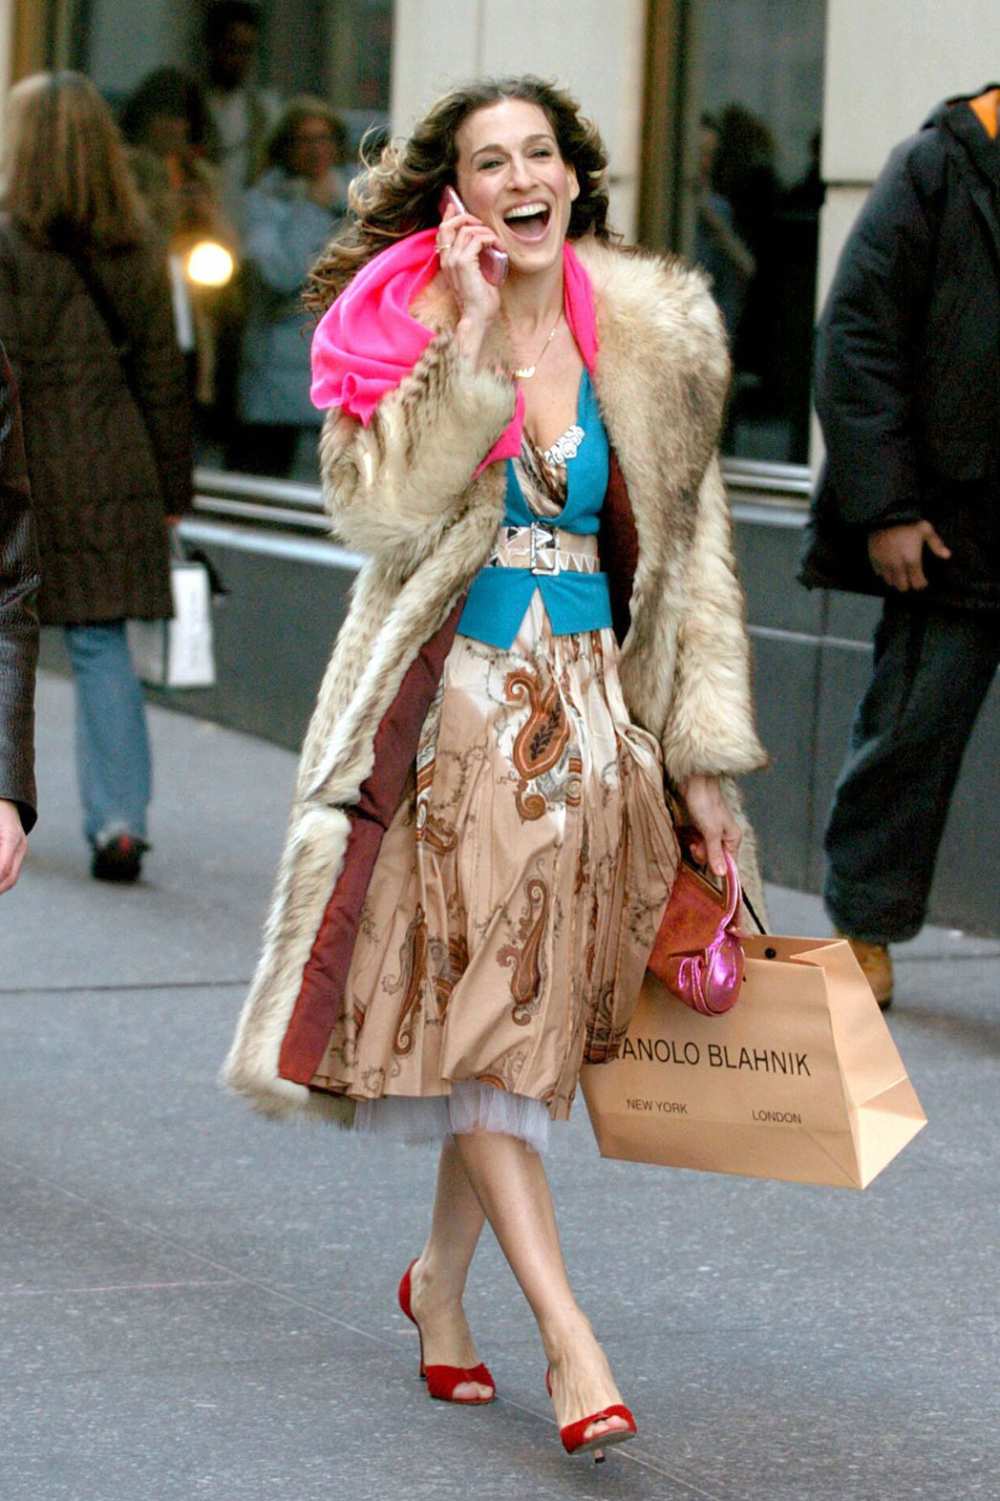 Here's how you can go shoe shopping with Carrie Bradshaw herself